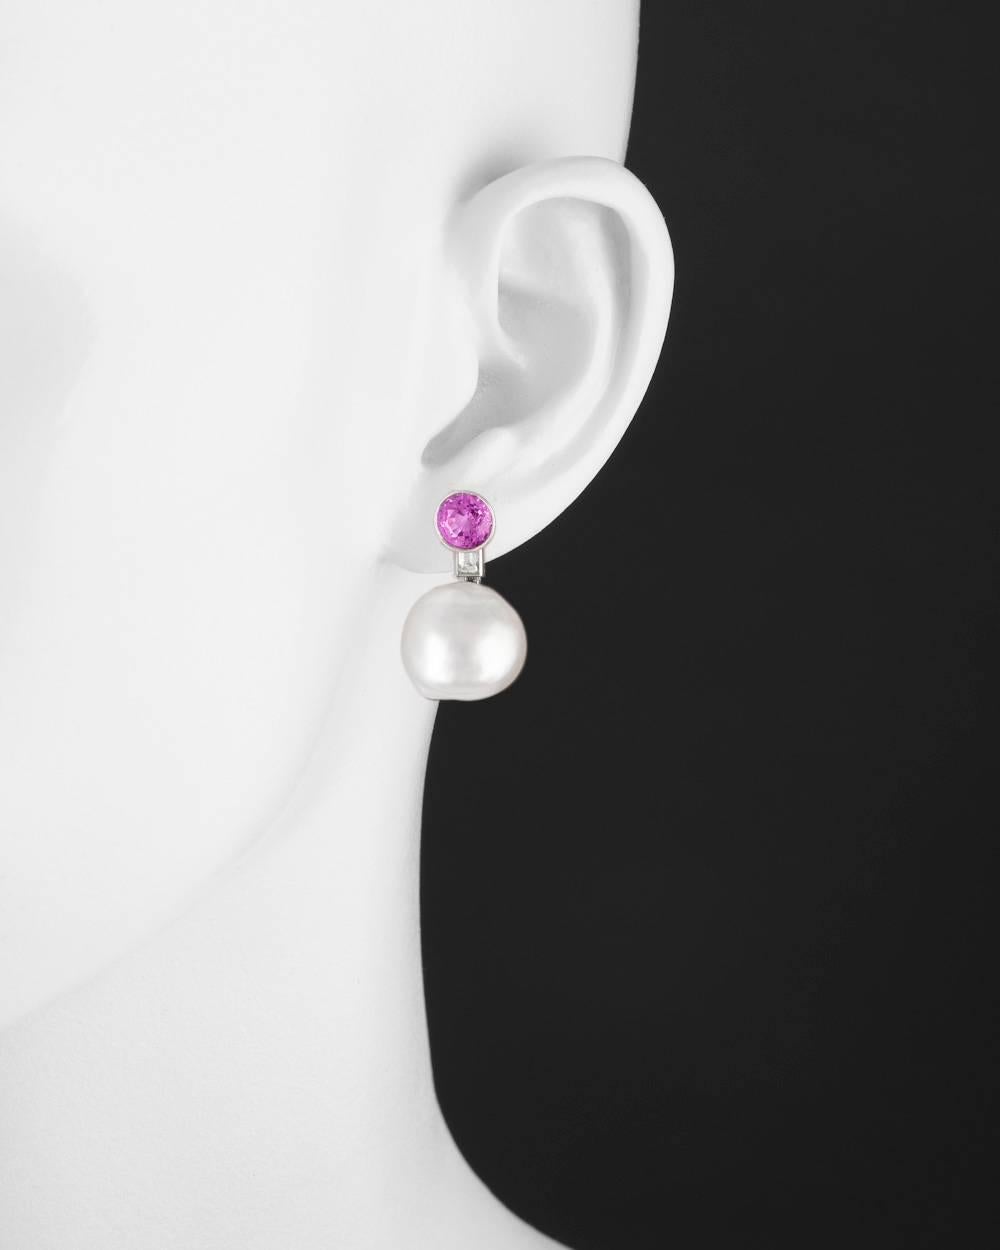 Drop earrings, showcasing a cultured South Sea baroque pearl drop suspended from a baguette-cut diamond to the bezel-set circular-cut pink sapphire tops, mounted in platinum. Two pink sapphires weighing approximately 3.42 total carats. Clip backs.
